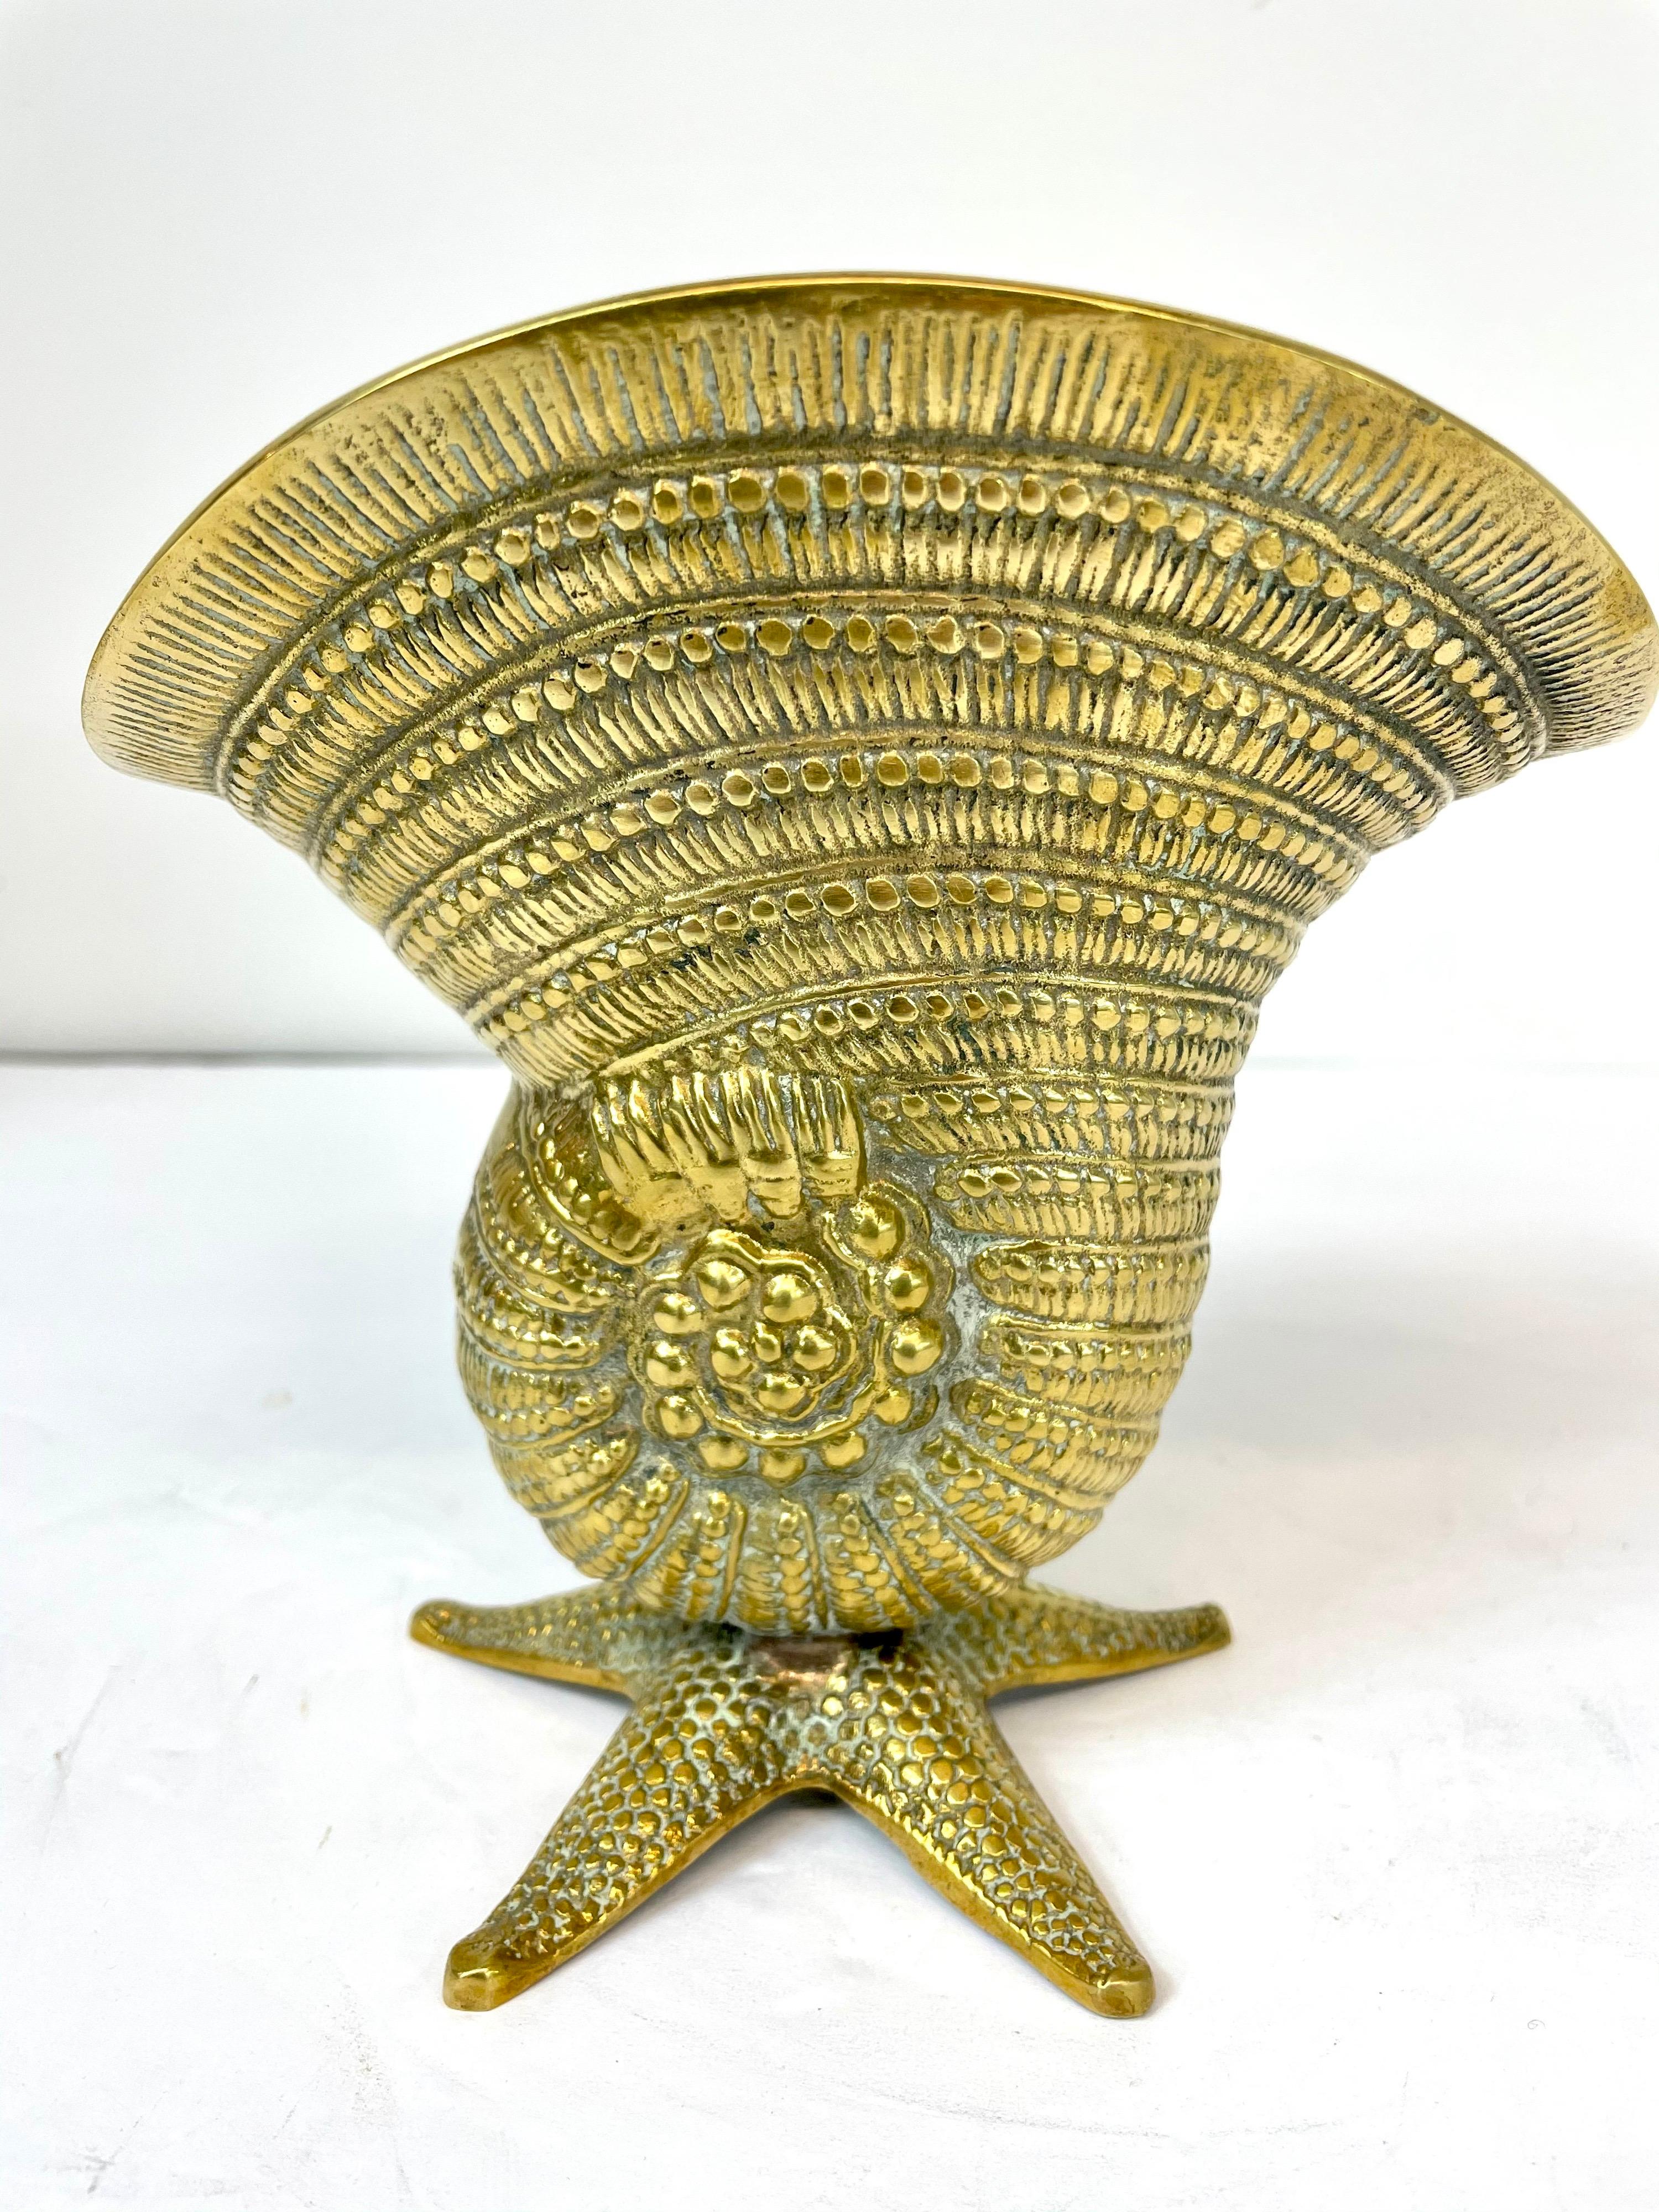 Brass sea shell on star fish base. Hand polished. Nice statement piece. Very unusual design with nice detail. Overall nice condition. Ready for your beach house! Can be boxed and shipped.